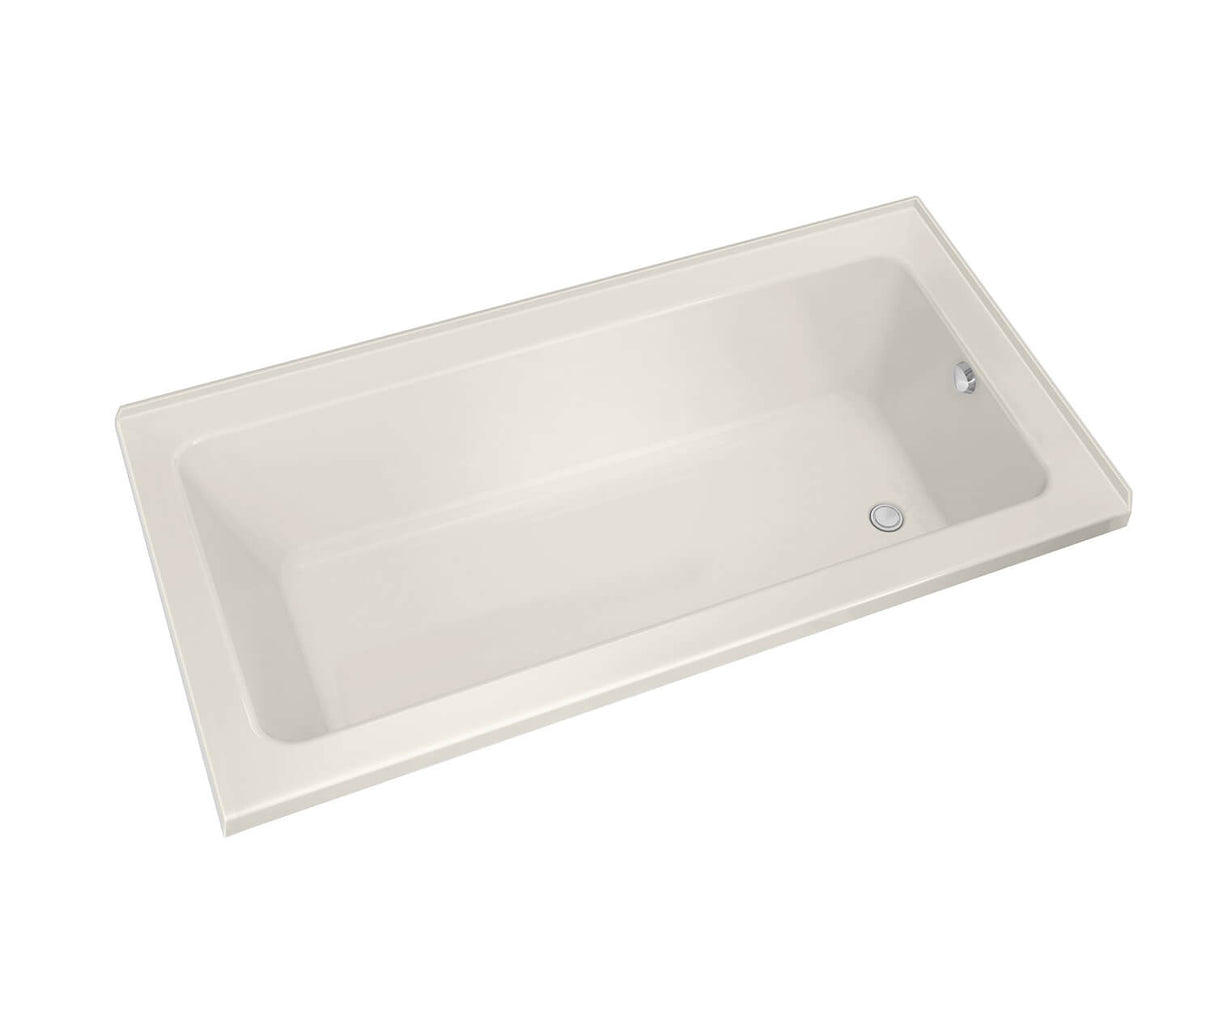 MAAX 106215-L-003-007 Pose 7242 IF Acrylic Corner Right Left-Hand Drain Whirlpool Bathtub in Biscuit